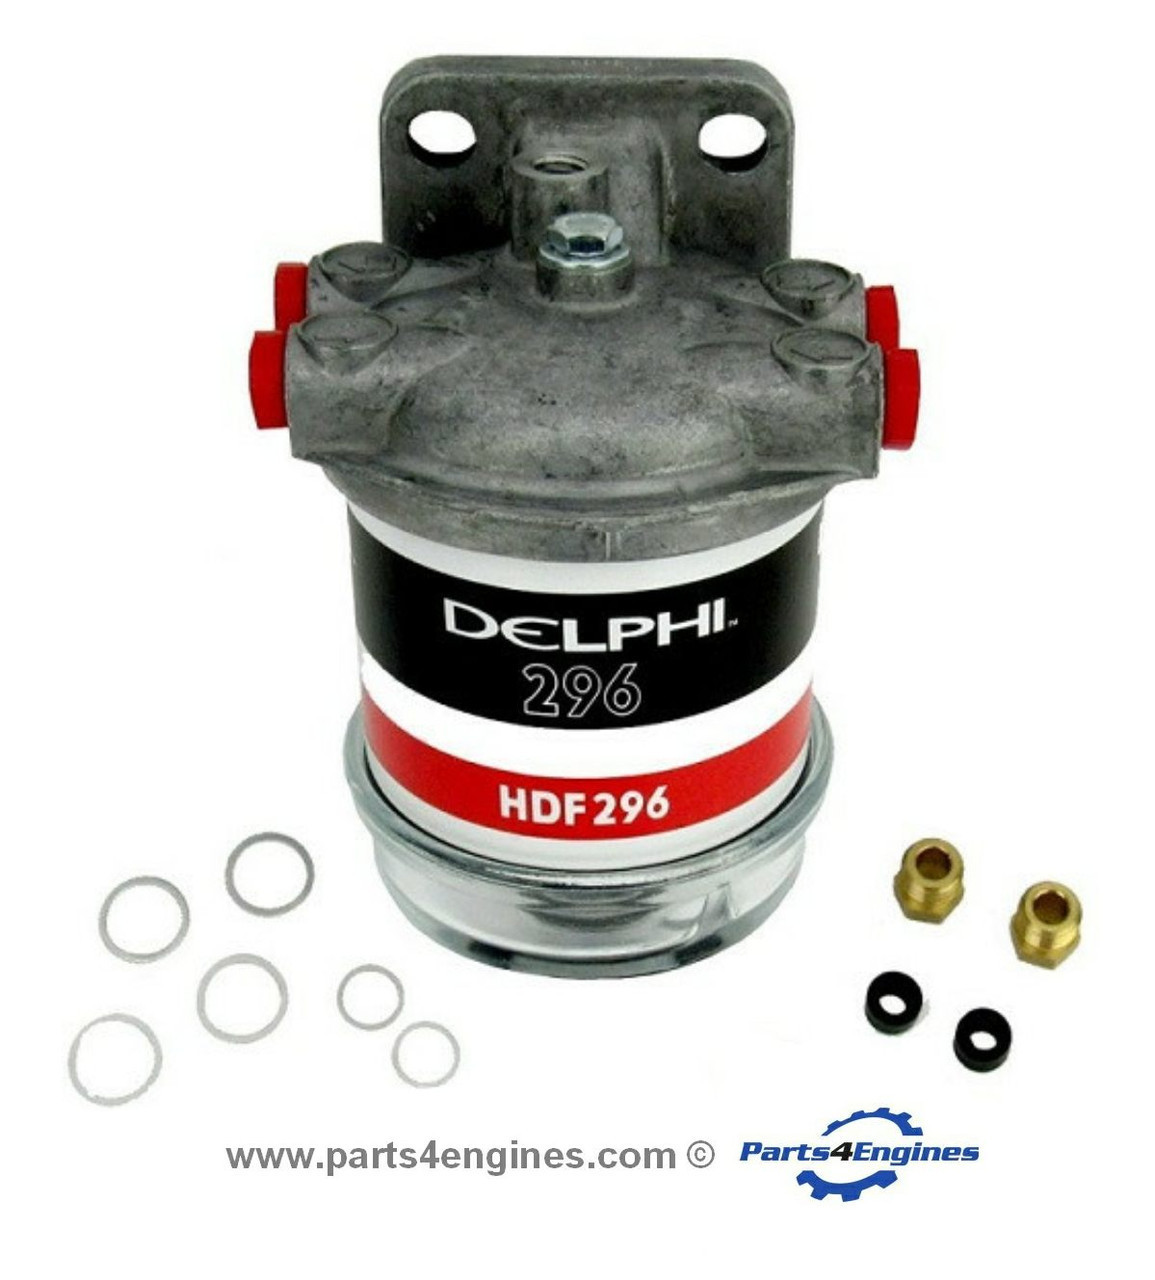 Perkins 4.203 fuel filter assembly with glass bowl from parts4engines.com